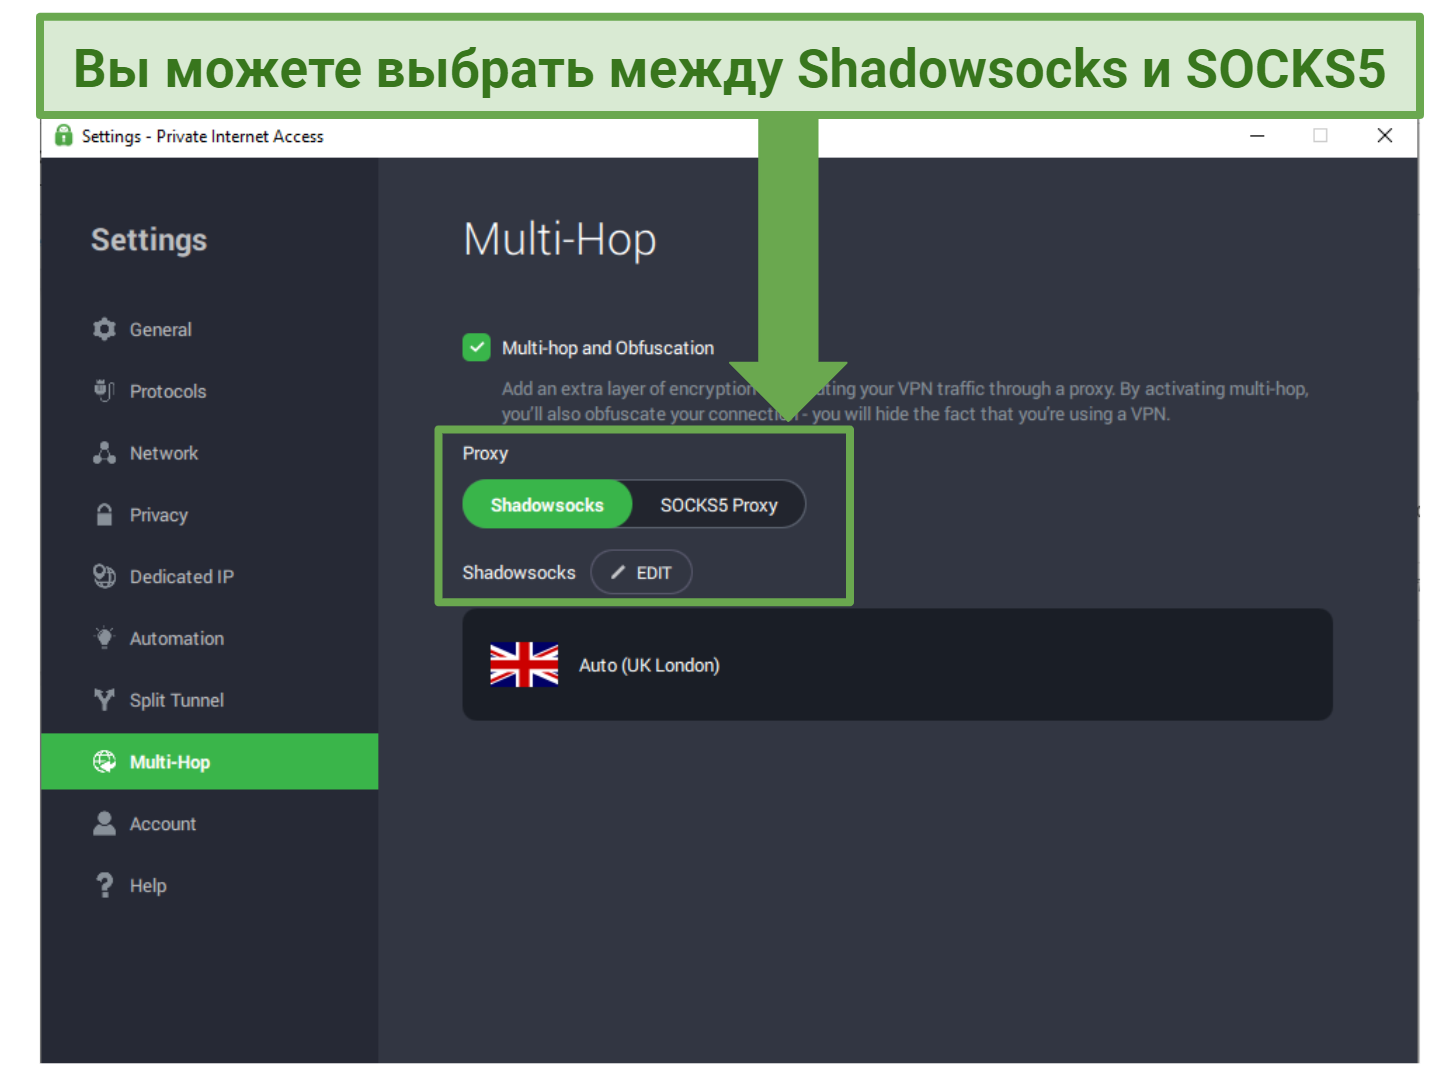 Screenshot of PIA settings panel showing the Multi-Hop feature and the option to choose between Shadowsocks and SOCKS5 proxy